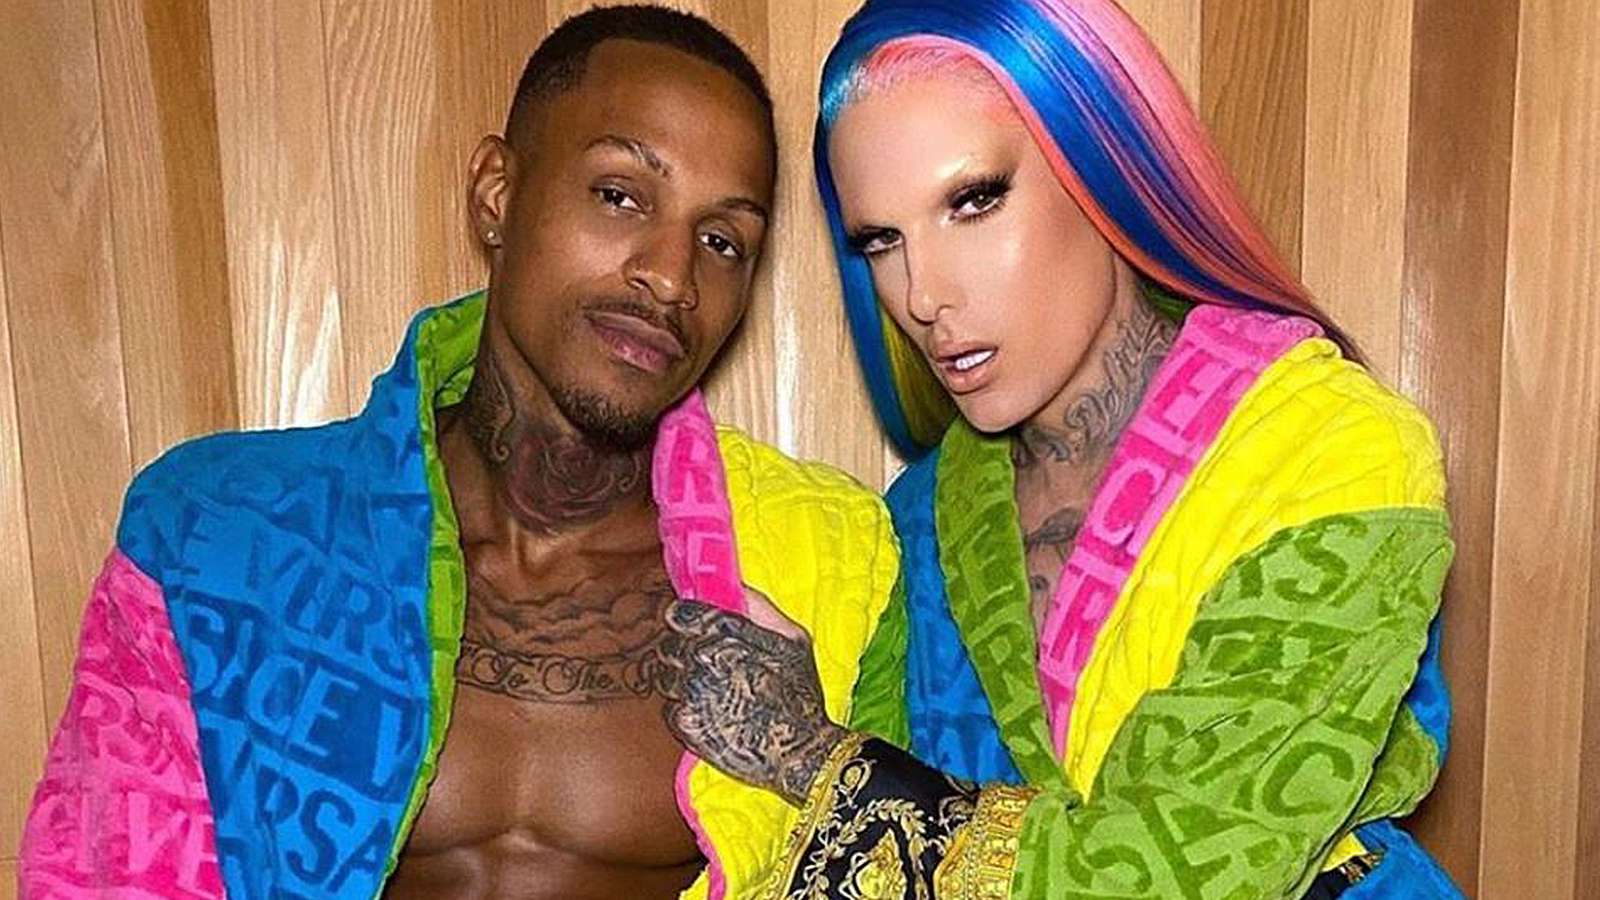 Jeffree Star and Andre Marhold pose for an affectionate photo.